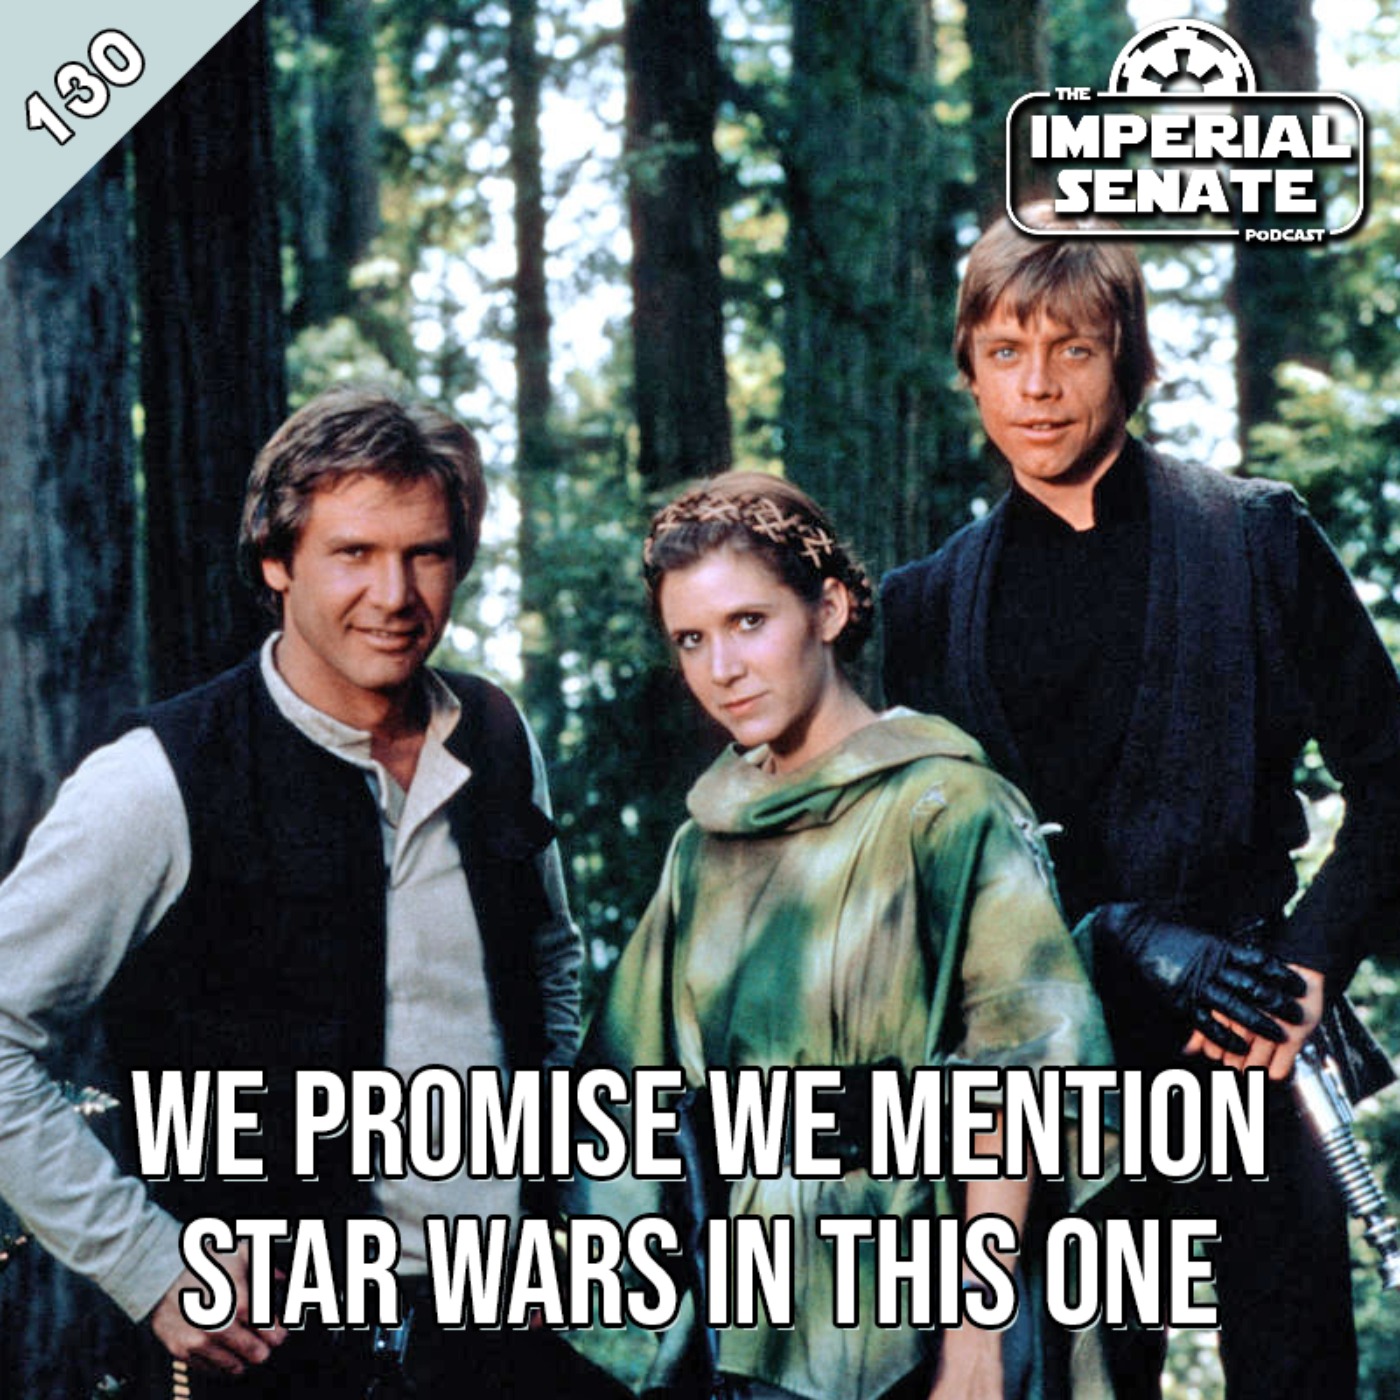 The Imperial Senate Podcast: Episode 130 - We Promise We Mention Star Wars In This One